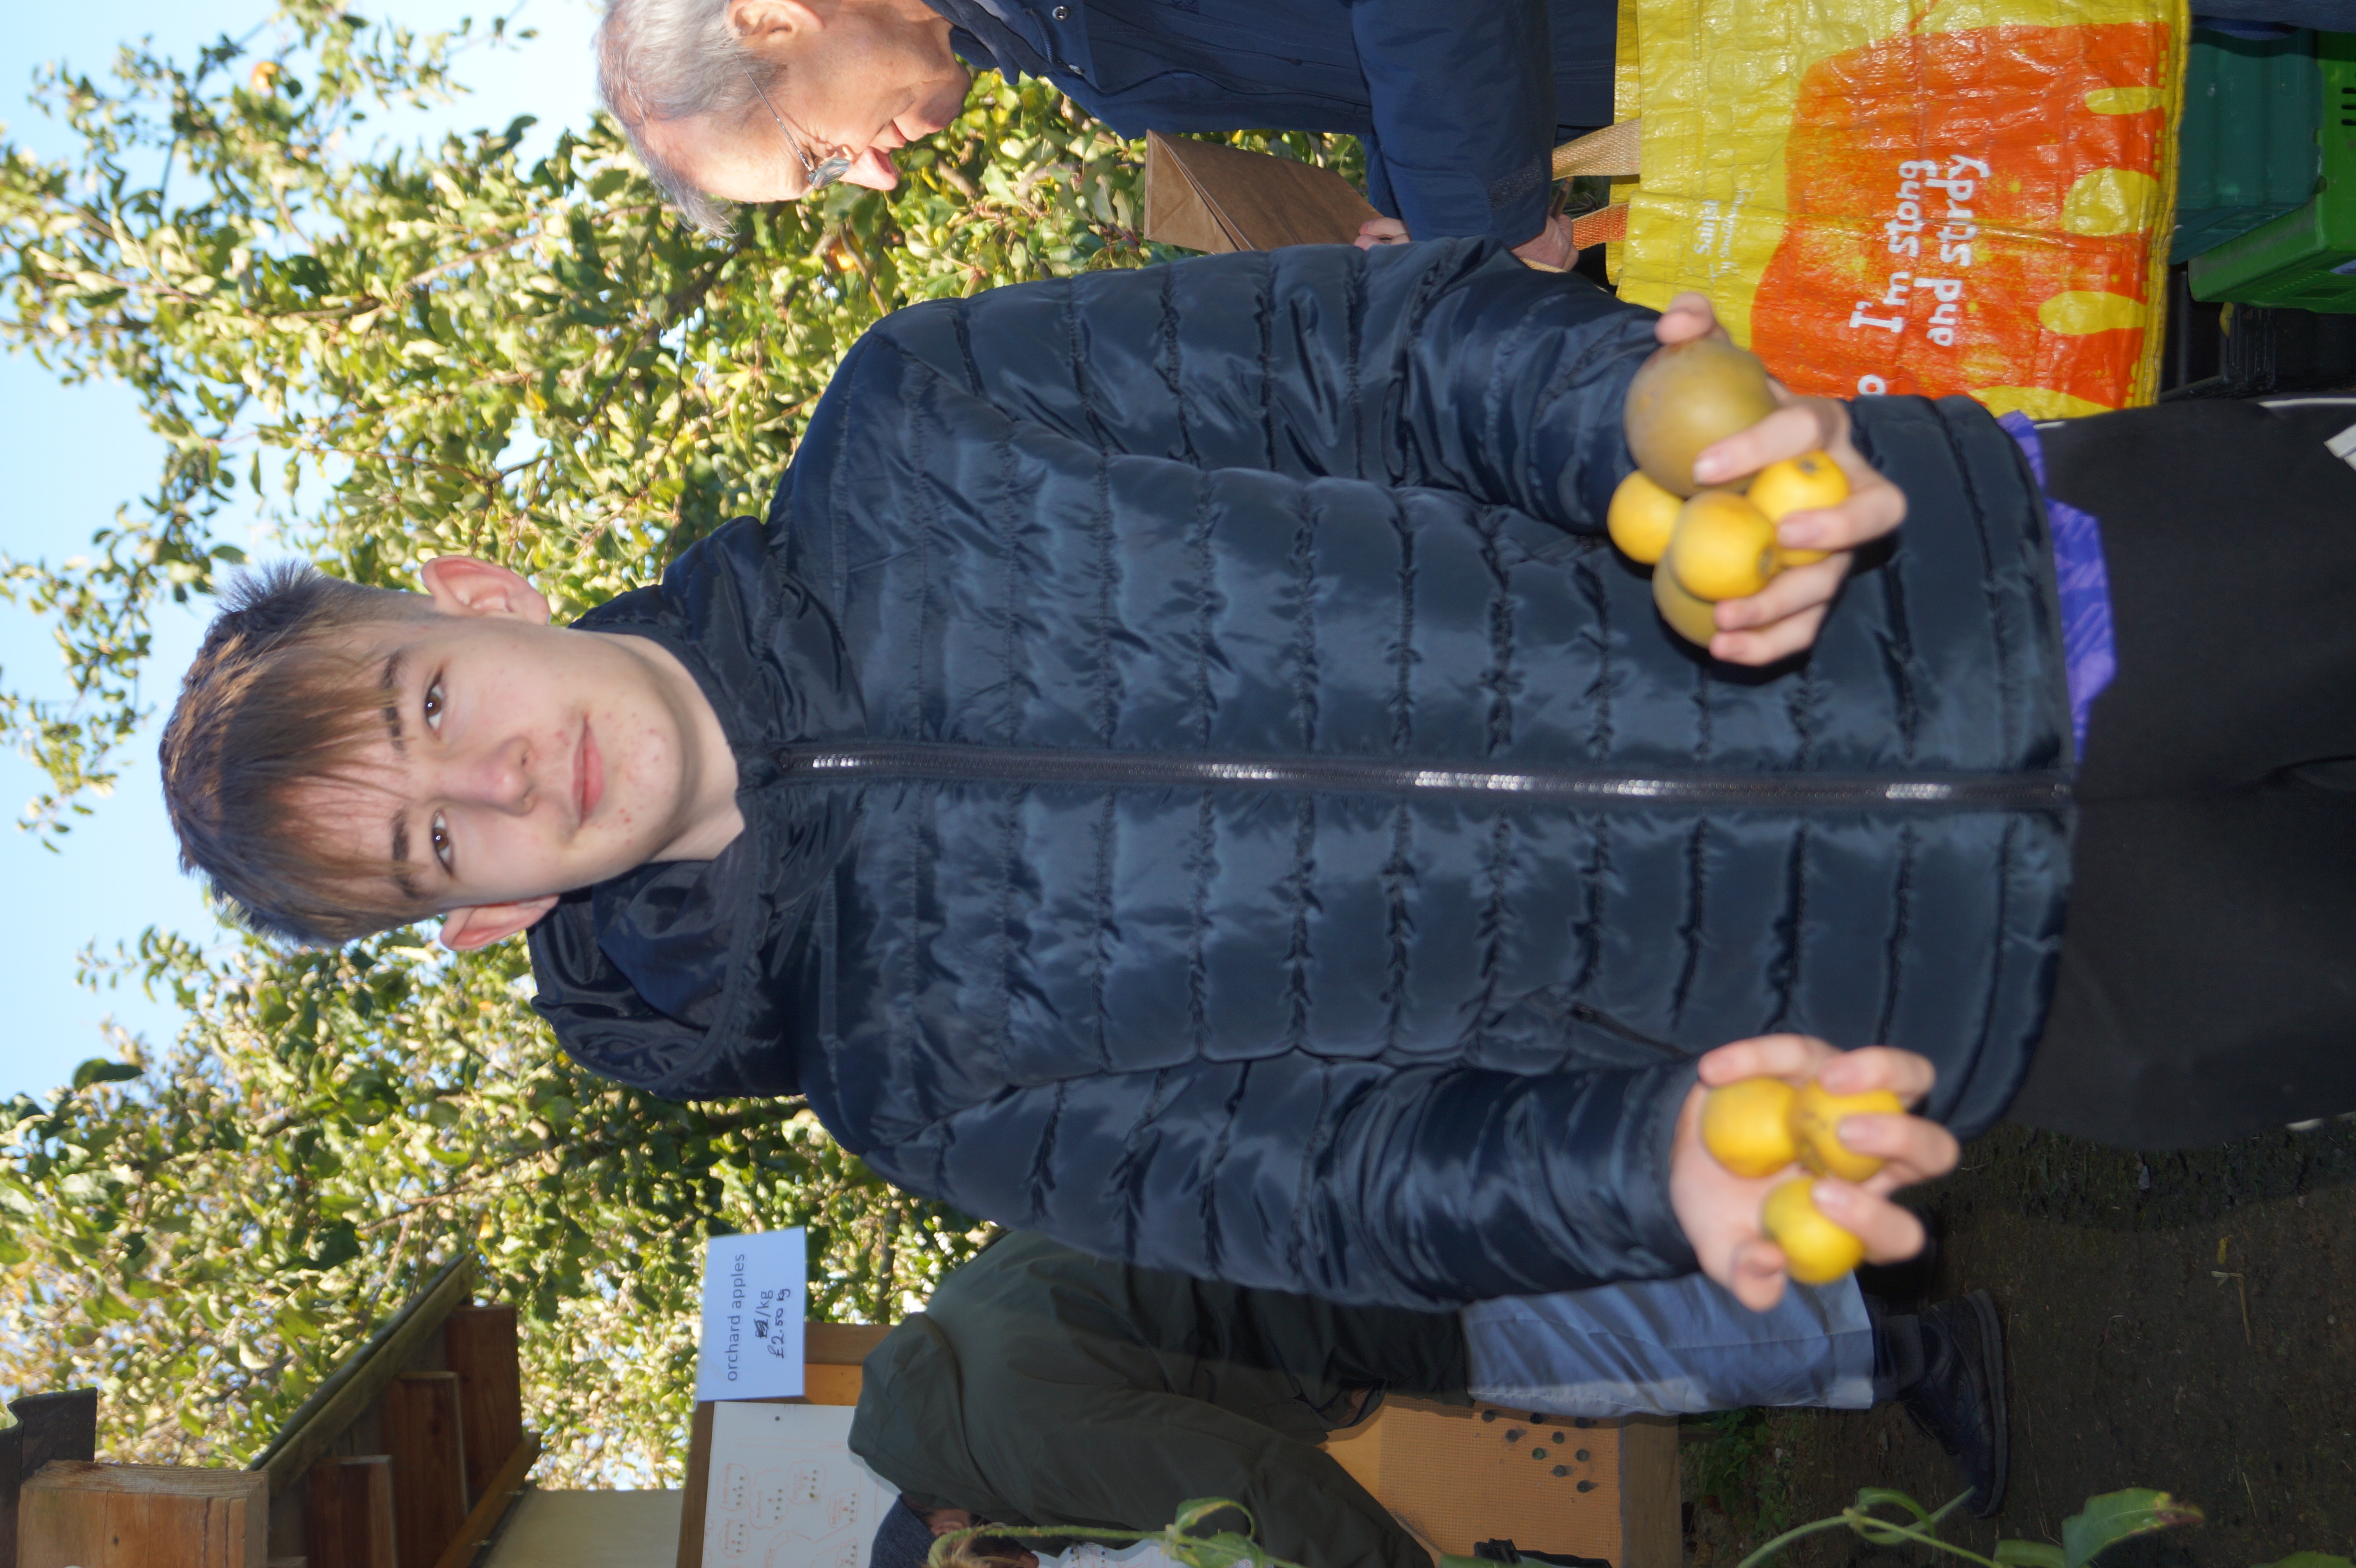 young man holding apples in his hands, people behind queing to buy apples